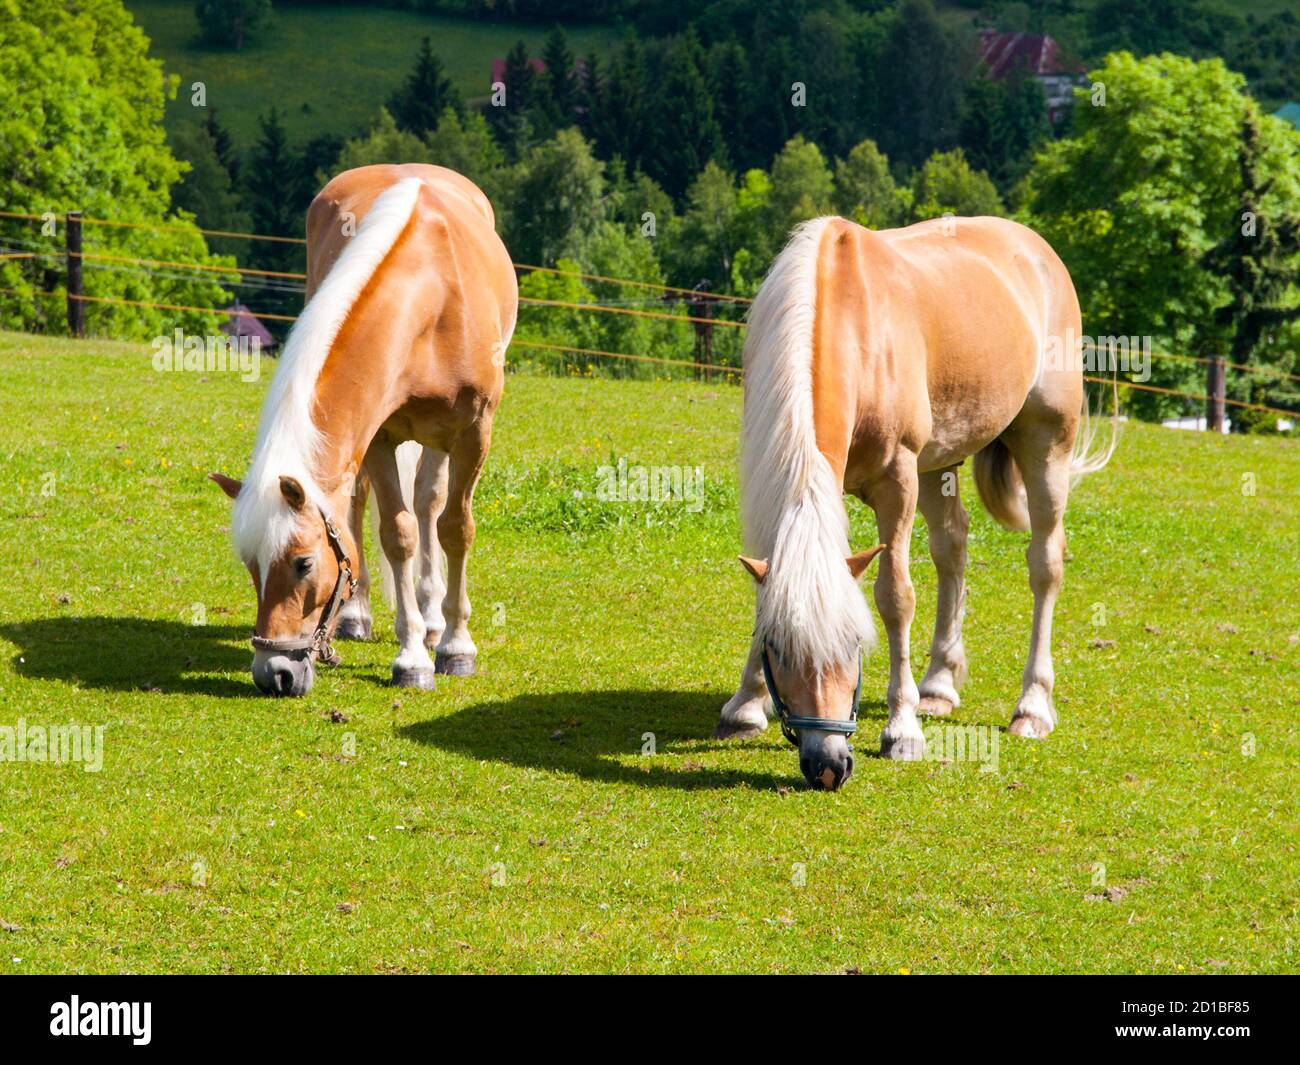 Two palomino horses grazing on a green pasture Stock Photo